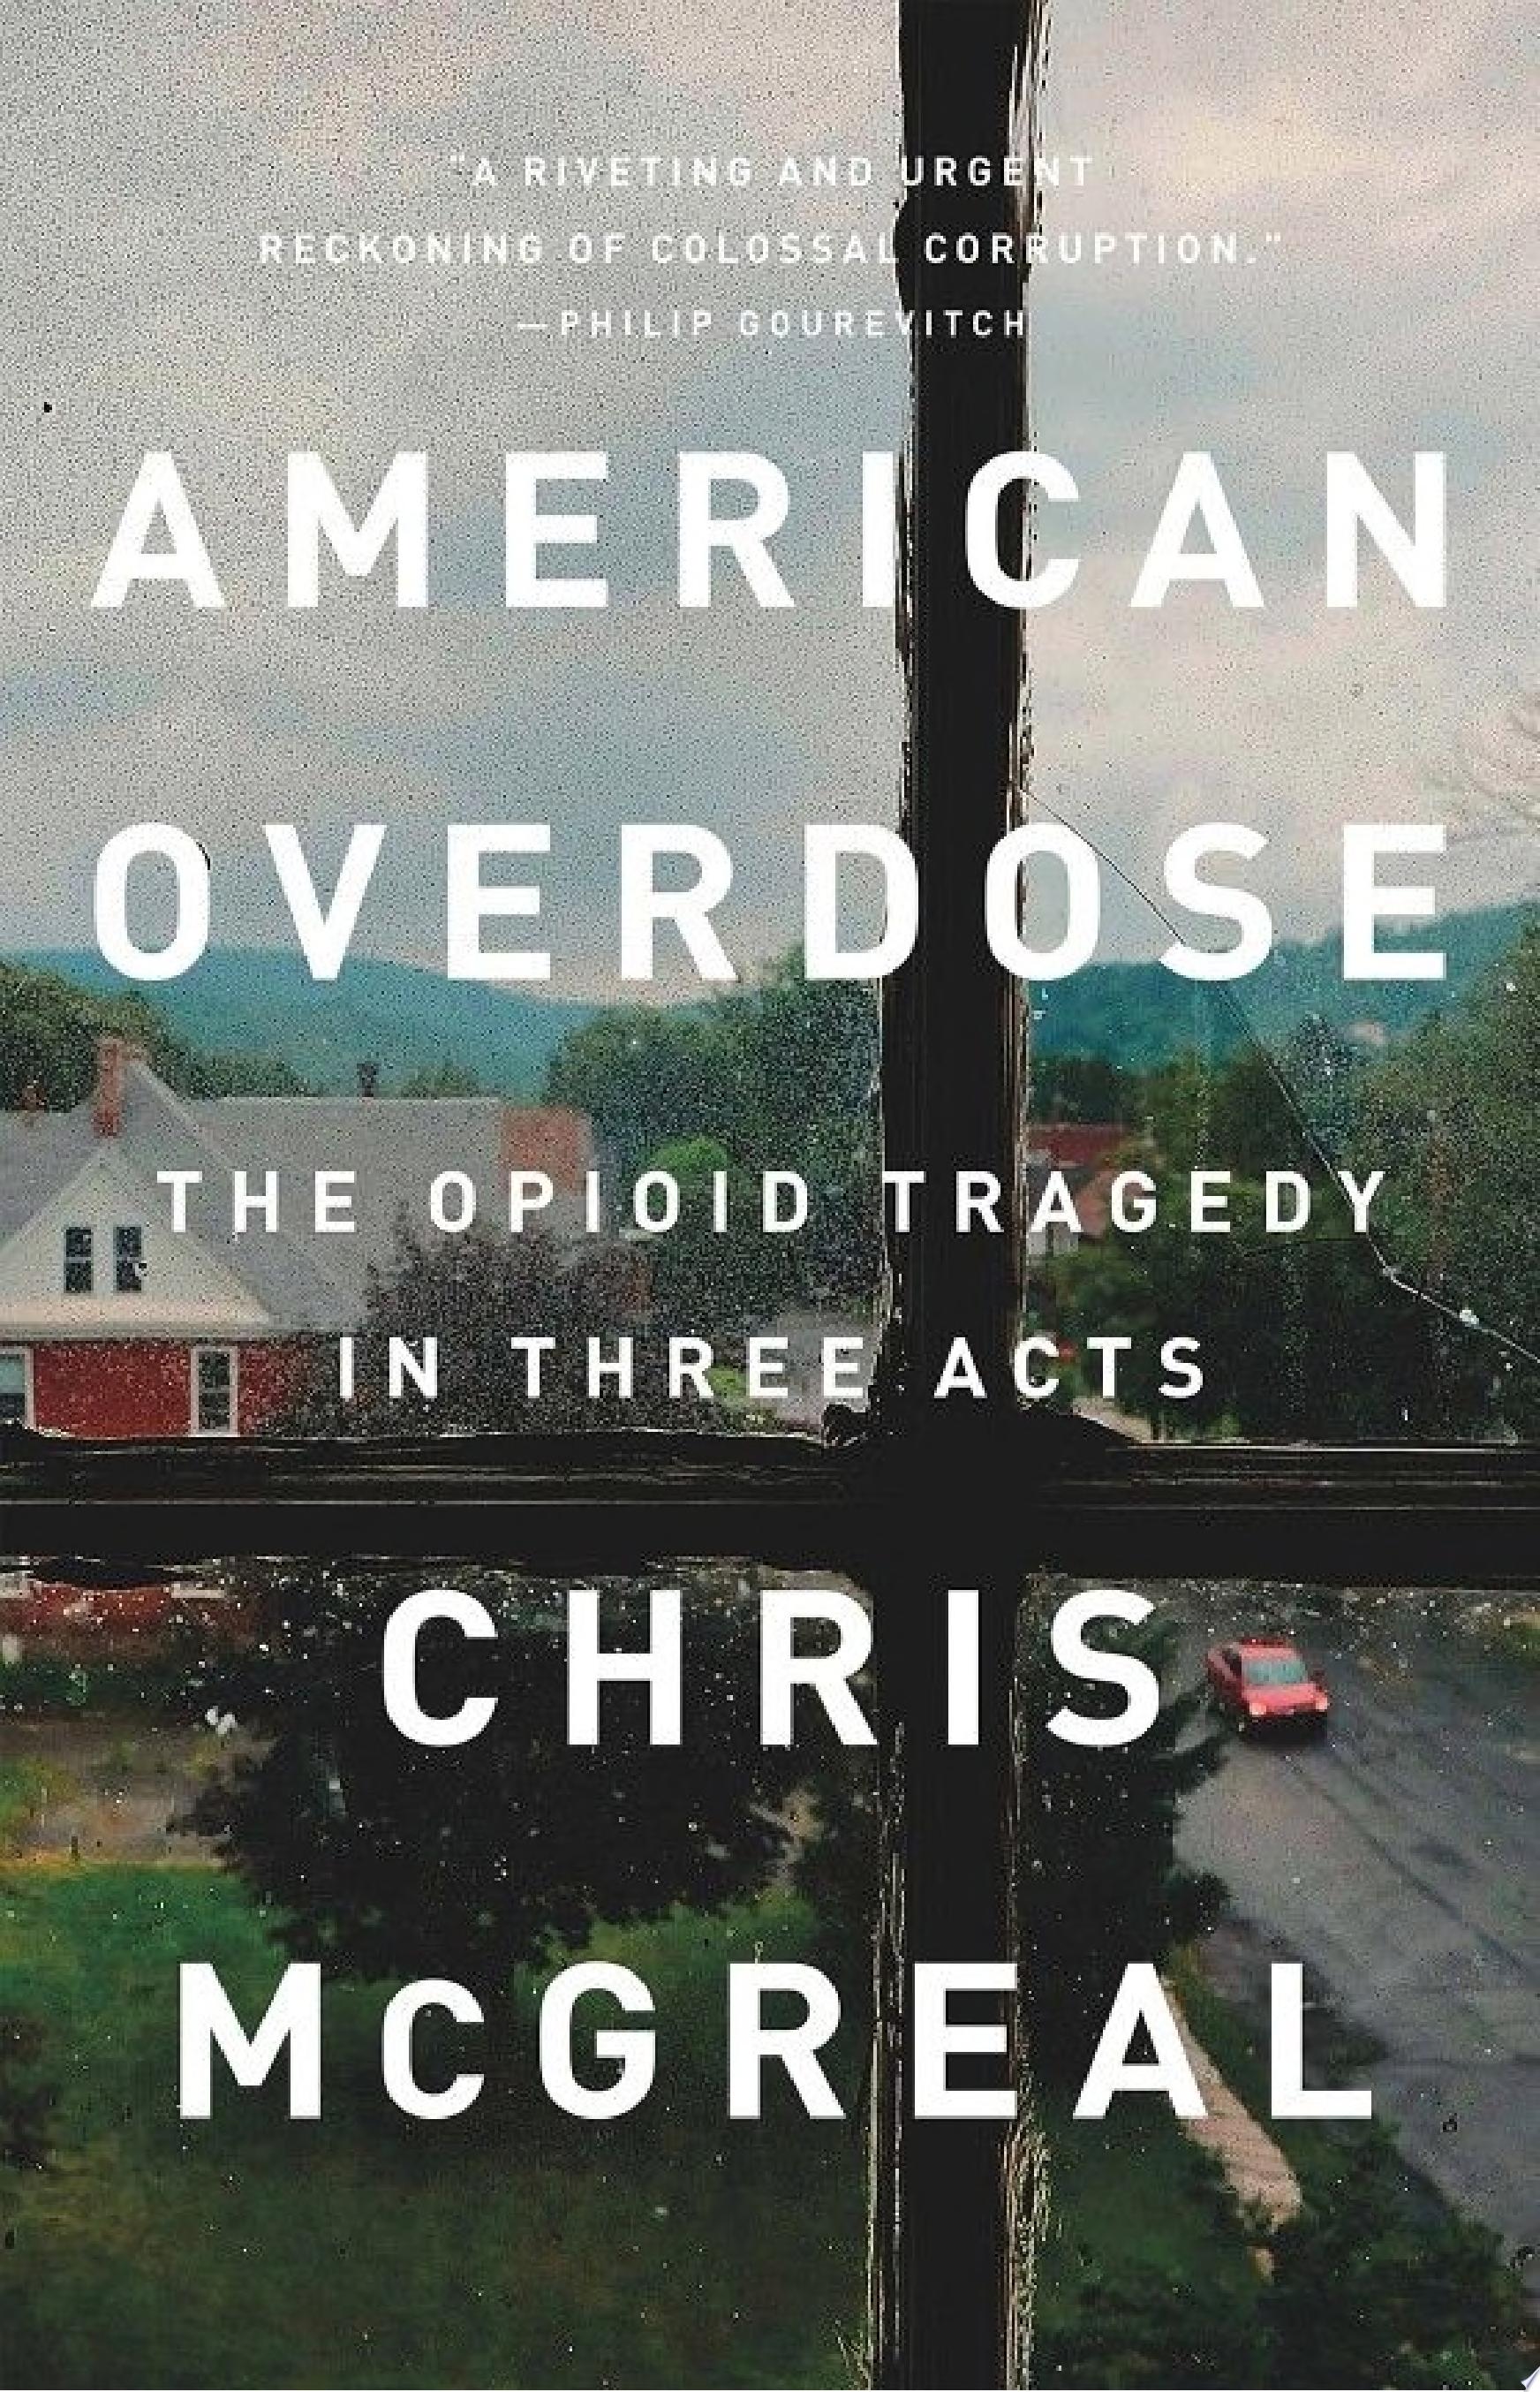 Image for "American Overdose"